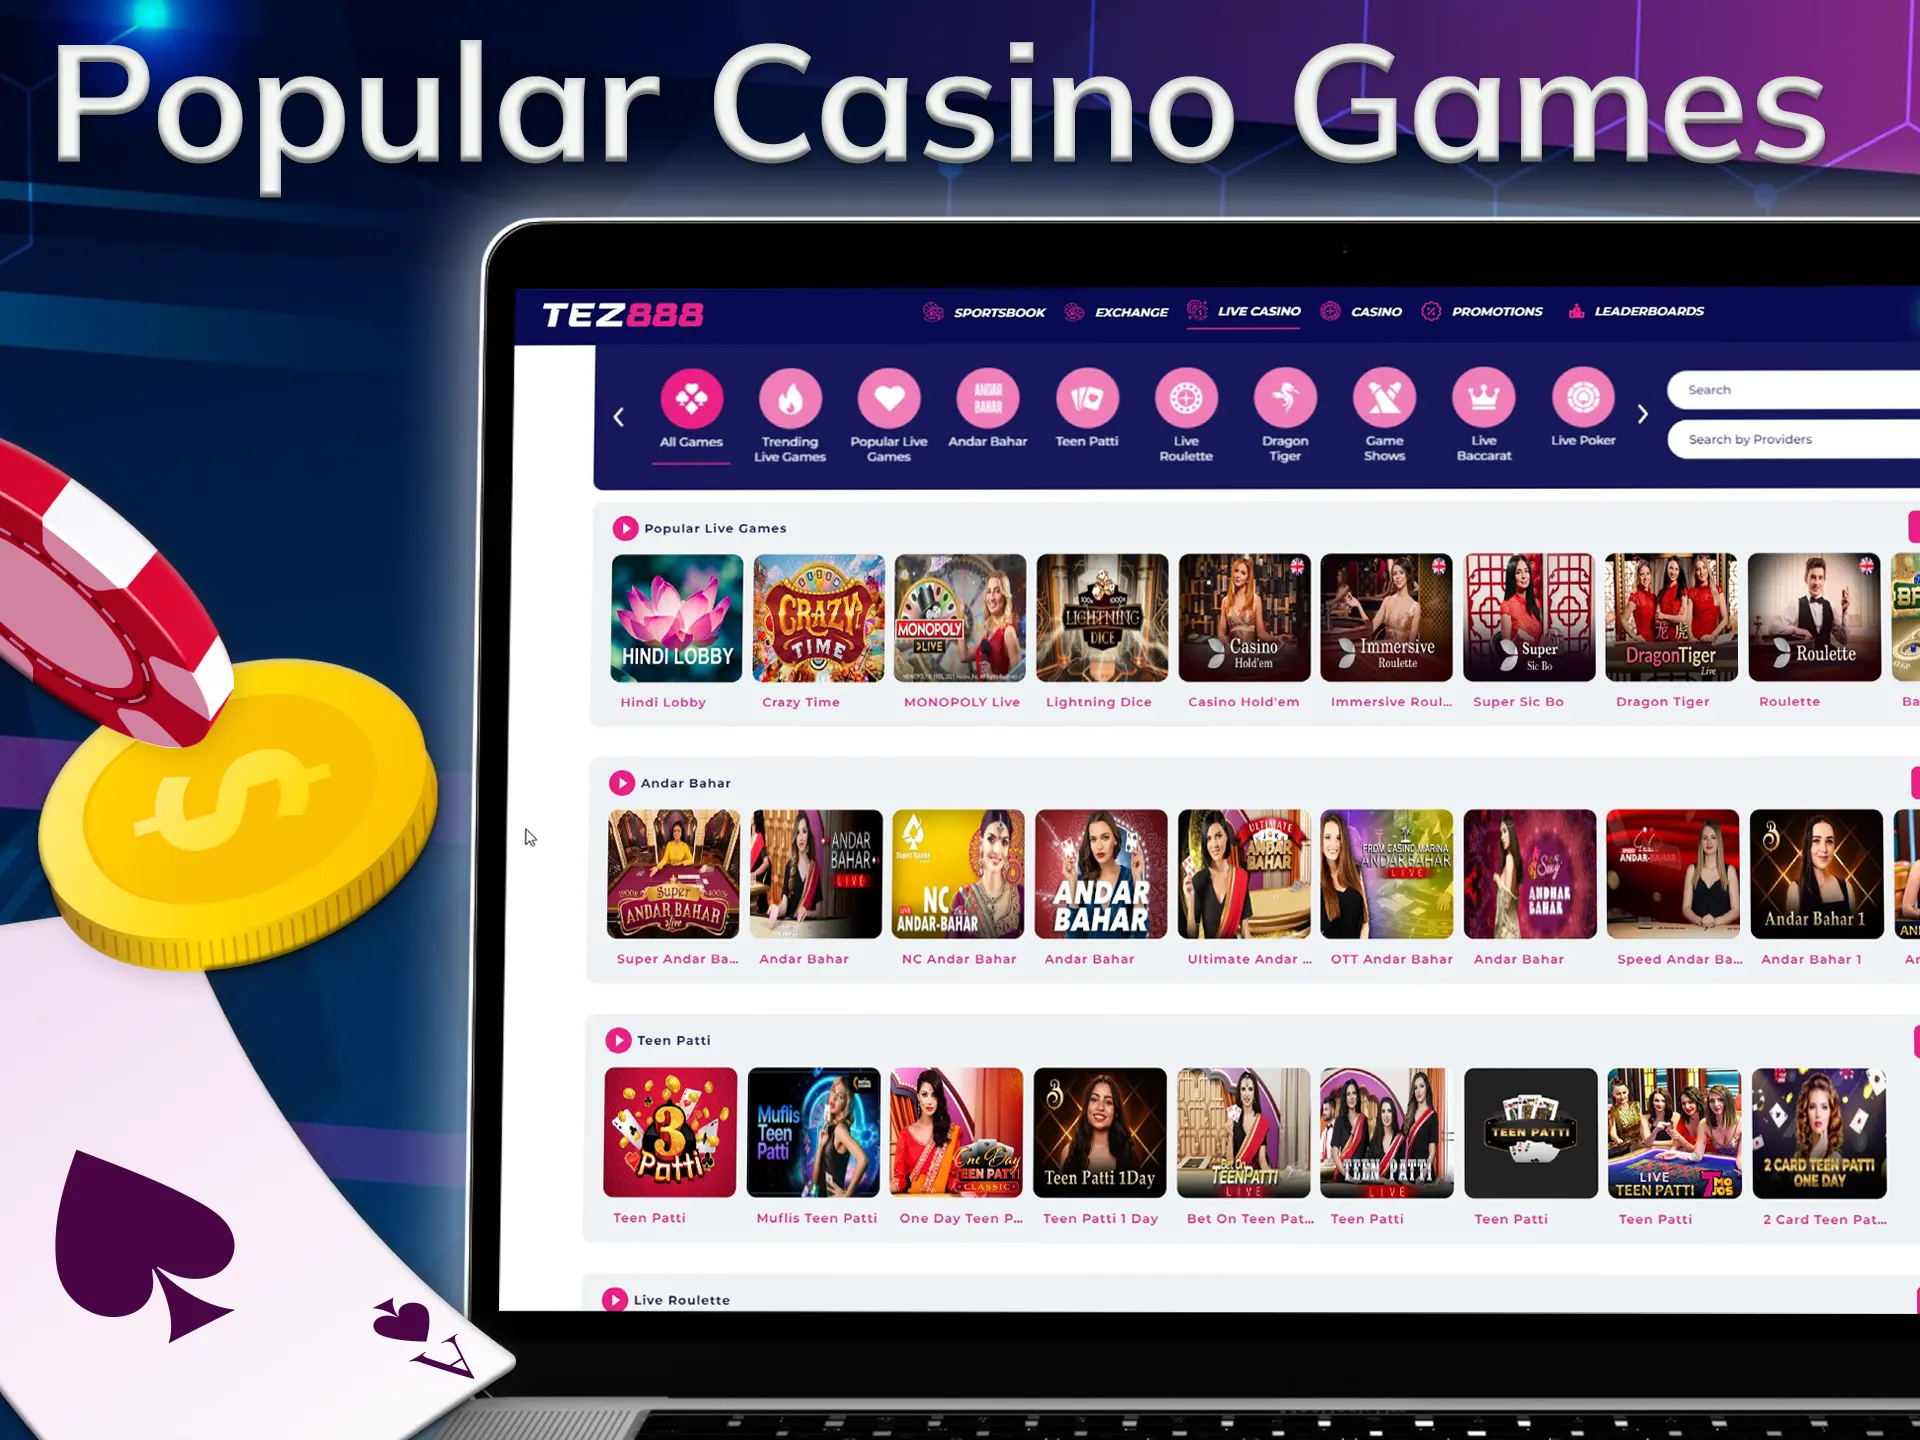 The tez888 site features the most popular casino games.